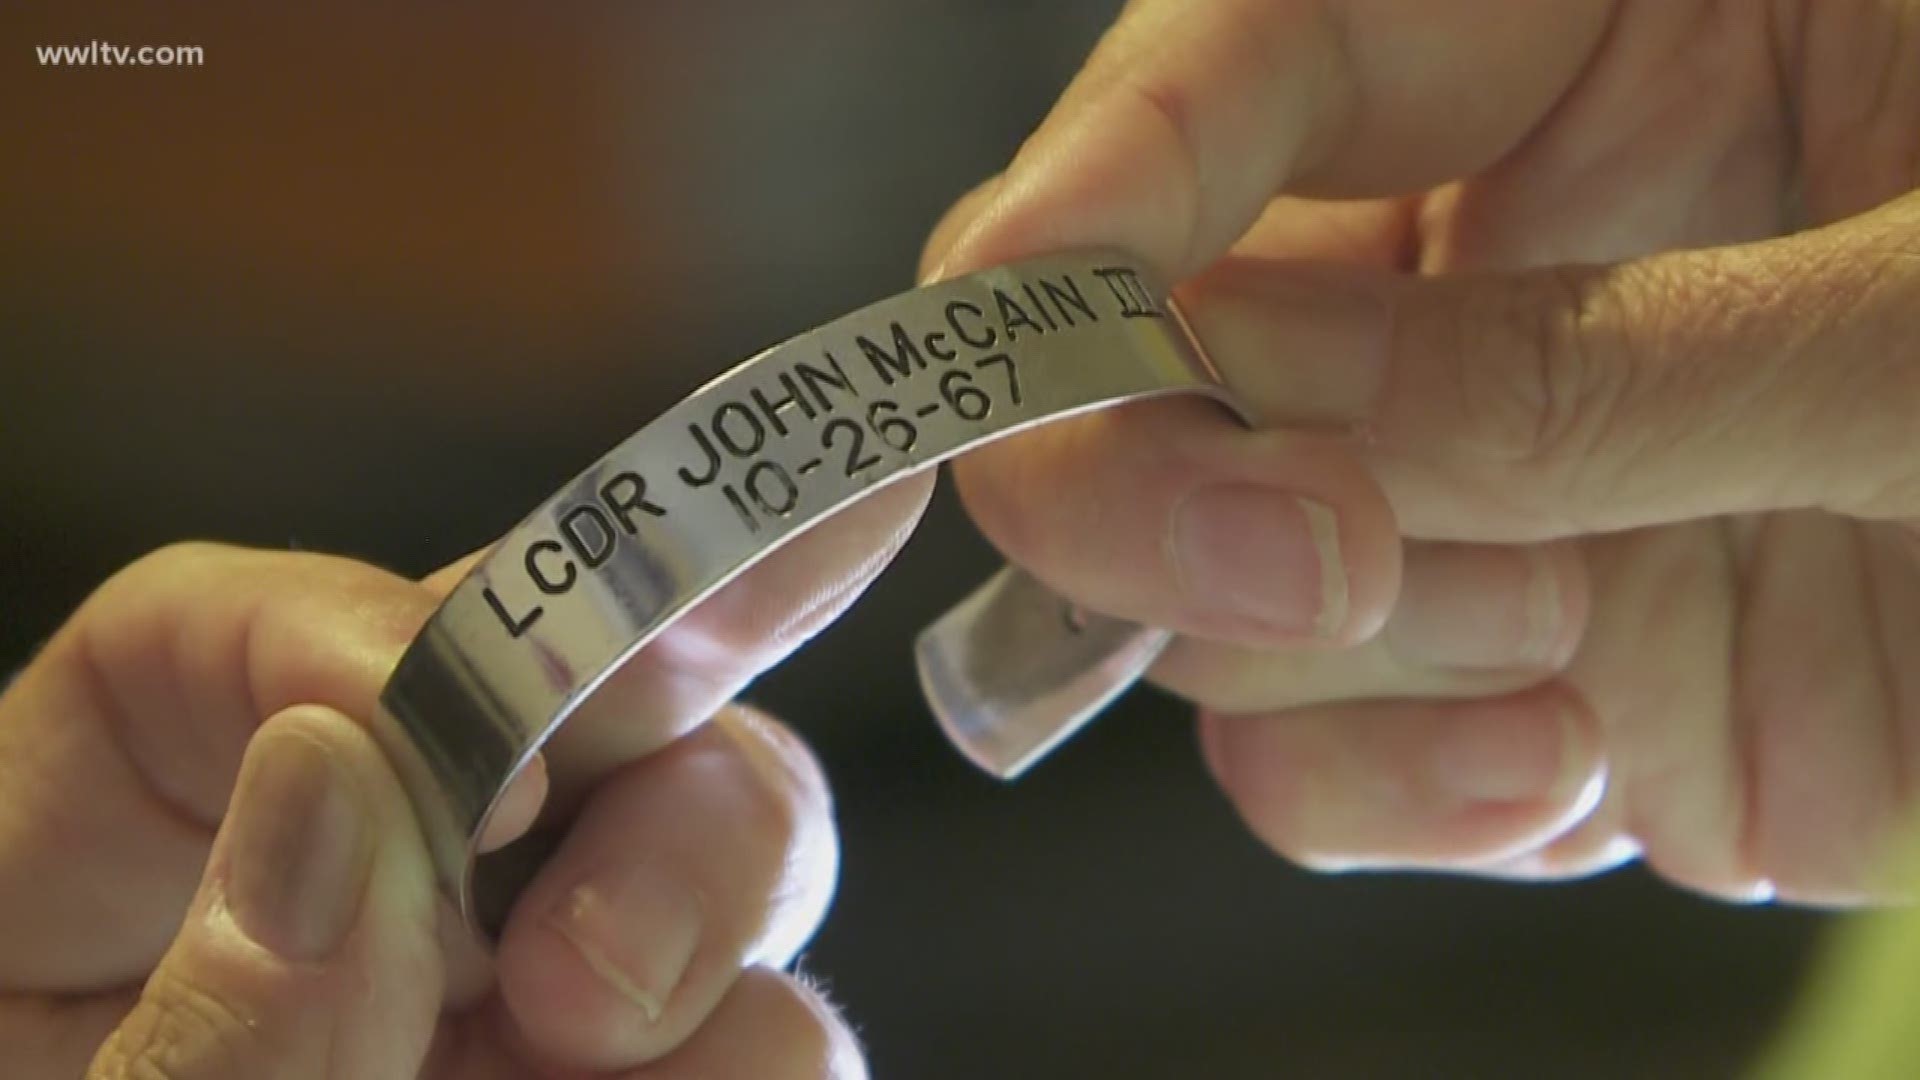 In 1970, 5 million bracelets were made, each with the name of one of the 726 prisoners of war in Vietnam.